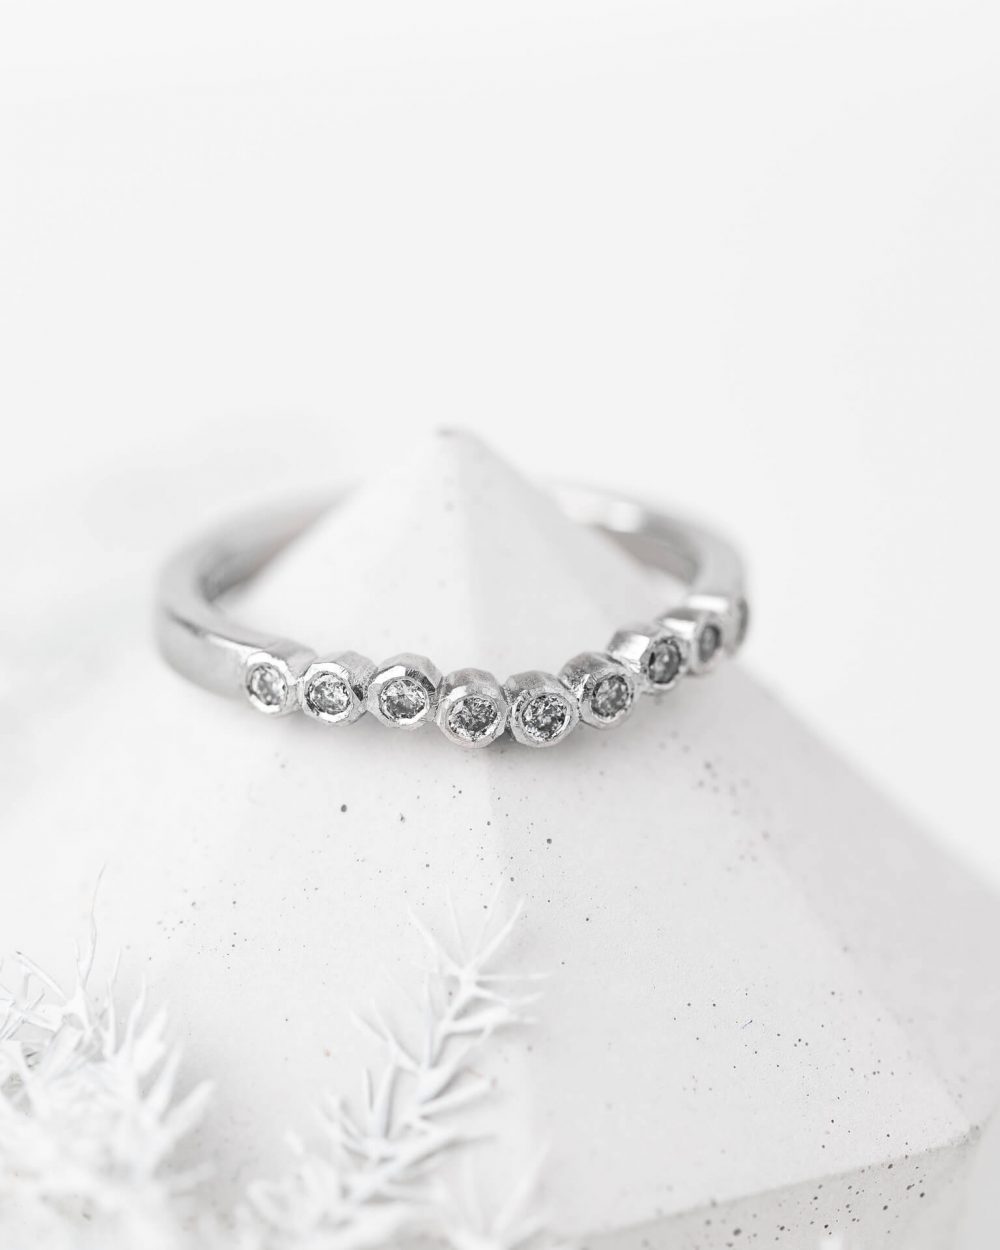 Geo Curved Salt And Pepper Diamond Ring, Handmade In Platinum. Pictured On A Cone By Bristol Jewellery Designer Jacks Turner.